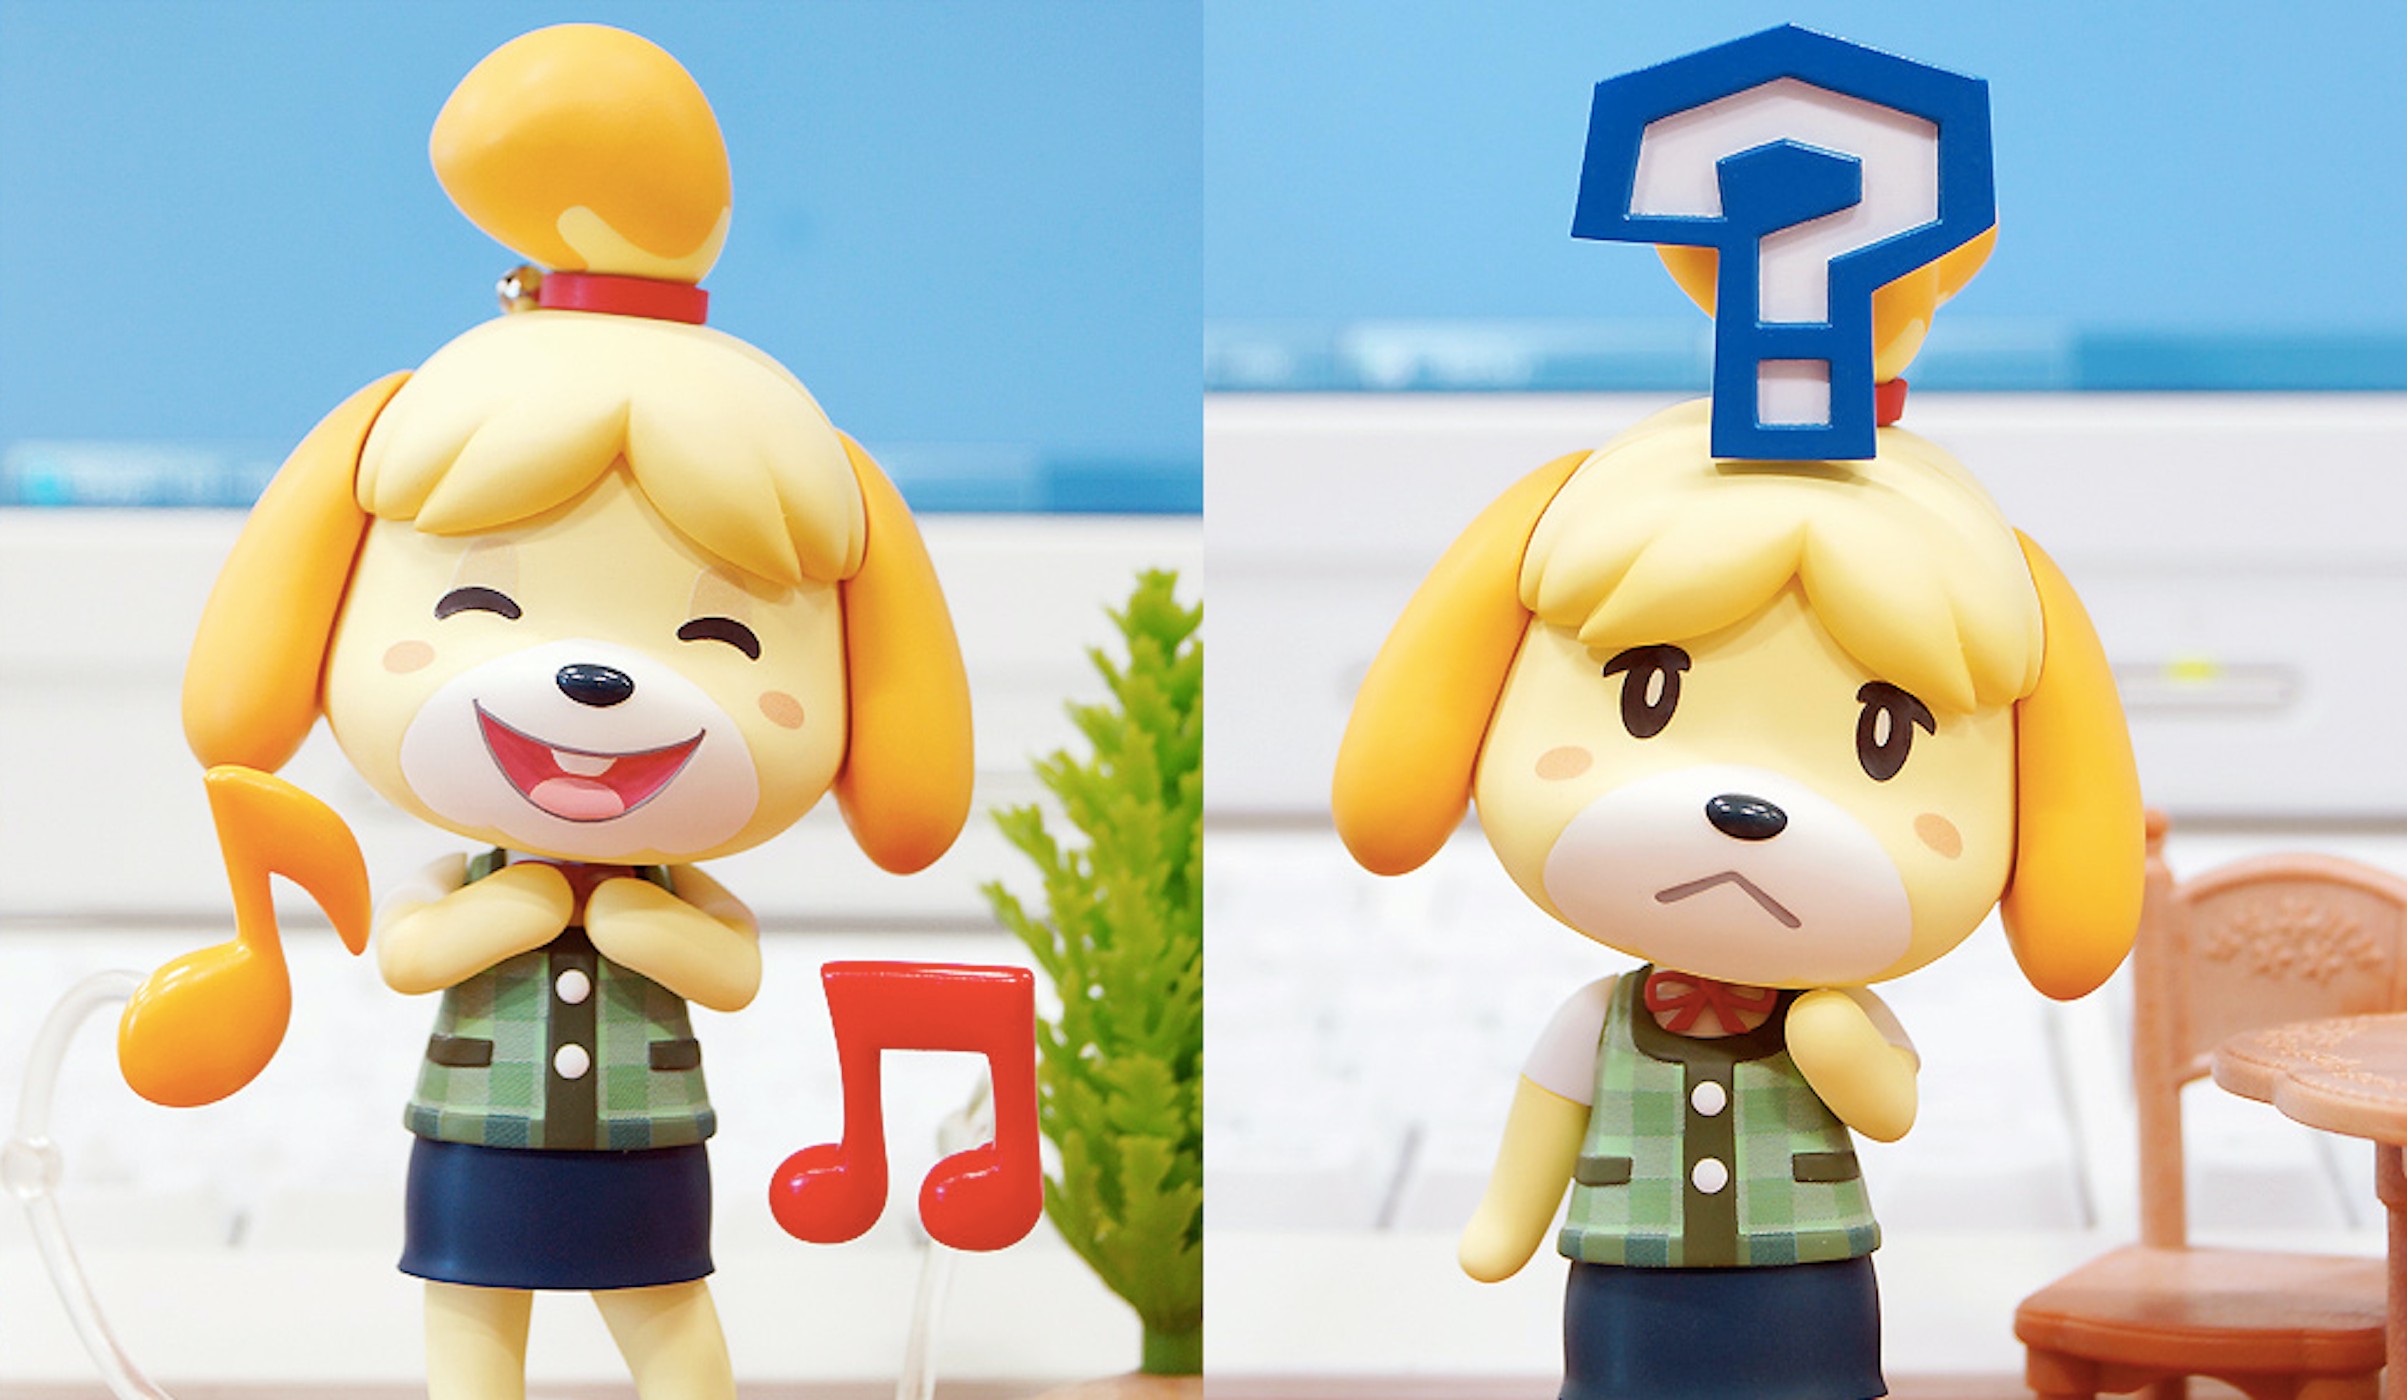 Animalcrossing Isabelle Porn Furry - Animal Crossing Porn Combines Villagers and the Horniness of Isolation